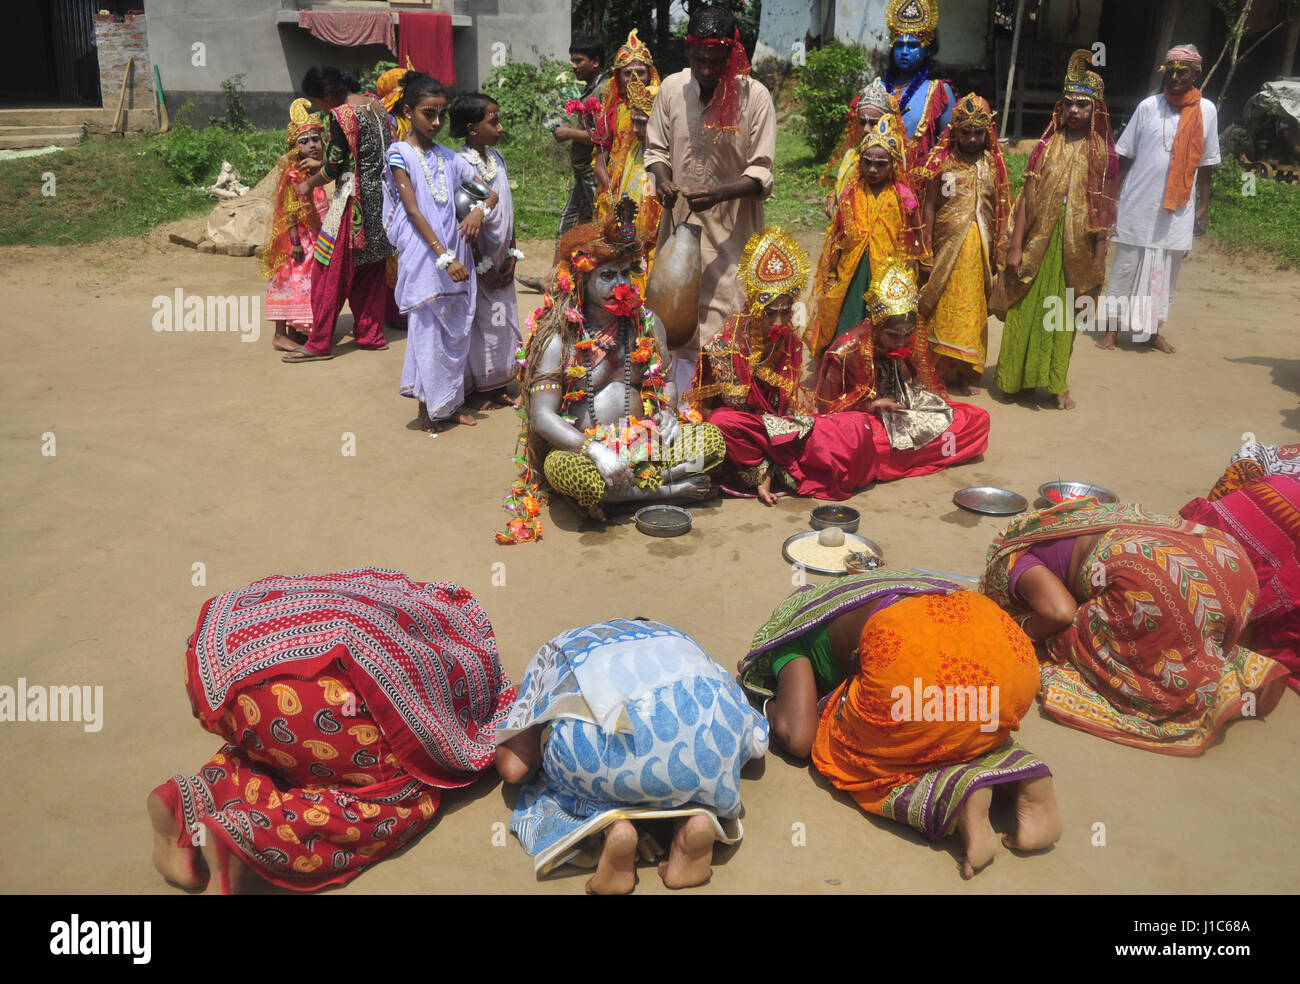 'Shiber Gajan', a traditional festival of the Hindu community -  13/04/2017  -  India / Tripura / Agartala  -  INDIA, TRIPURA-APRIL 13:The whole group of -Gajan- is in   a ritual before starting the 'Shiber Gajan',  in the outskirts of Agartala, capital of the Northeastern state of Tripura.                                                    'Shiber Gajan', a traditional festival of the Hindu community in the outskirts of Agartala city in Tripura. In Bengal and areas having Bengali speaking populace, Gajan is a unique festival celebrated in the last two days Chaitra which marks the end of the B Stock Photo